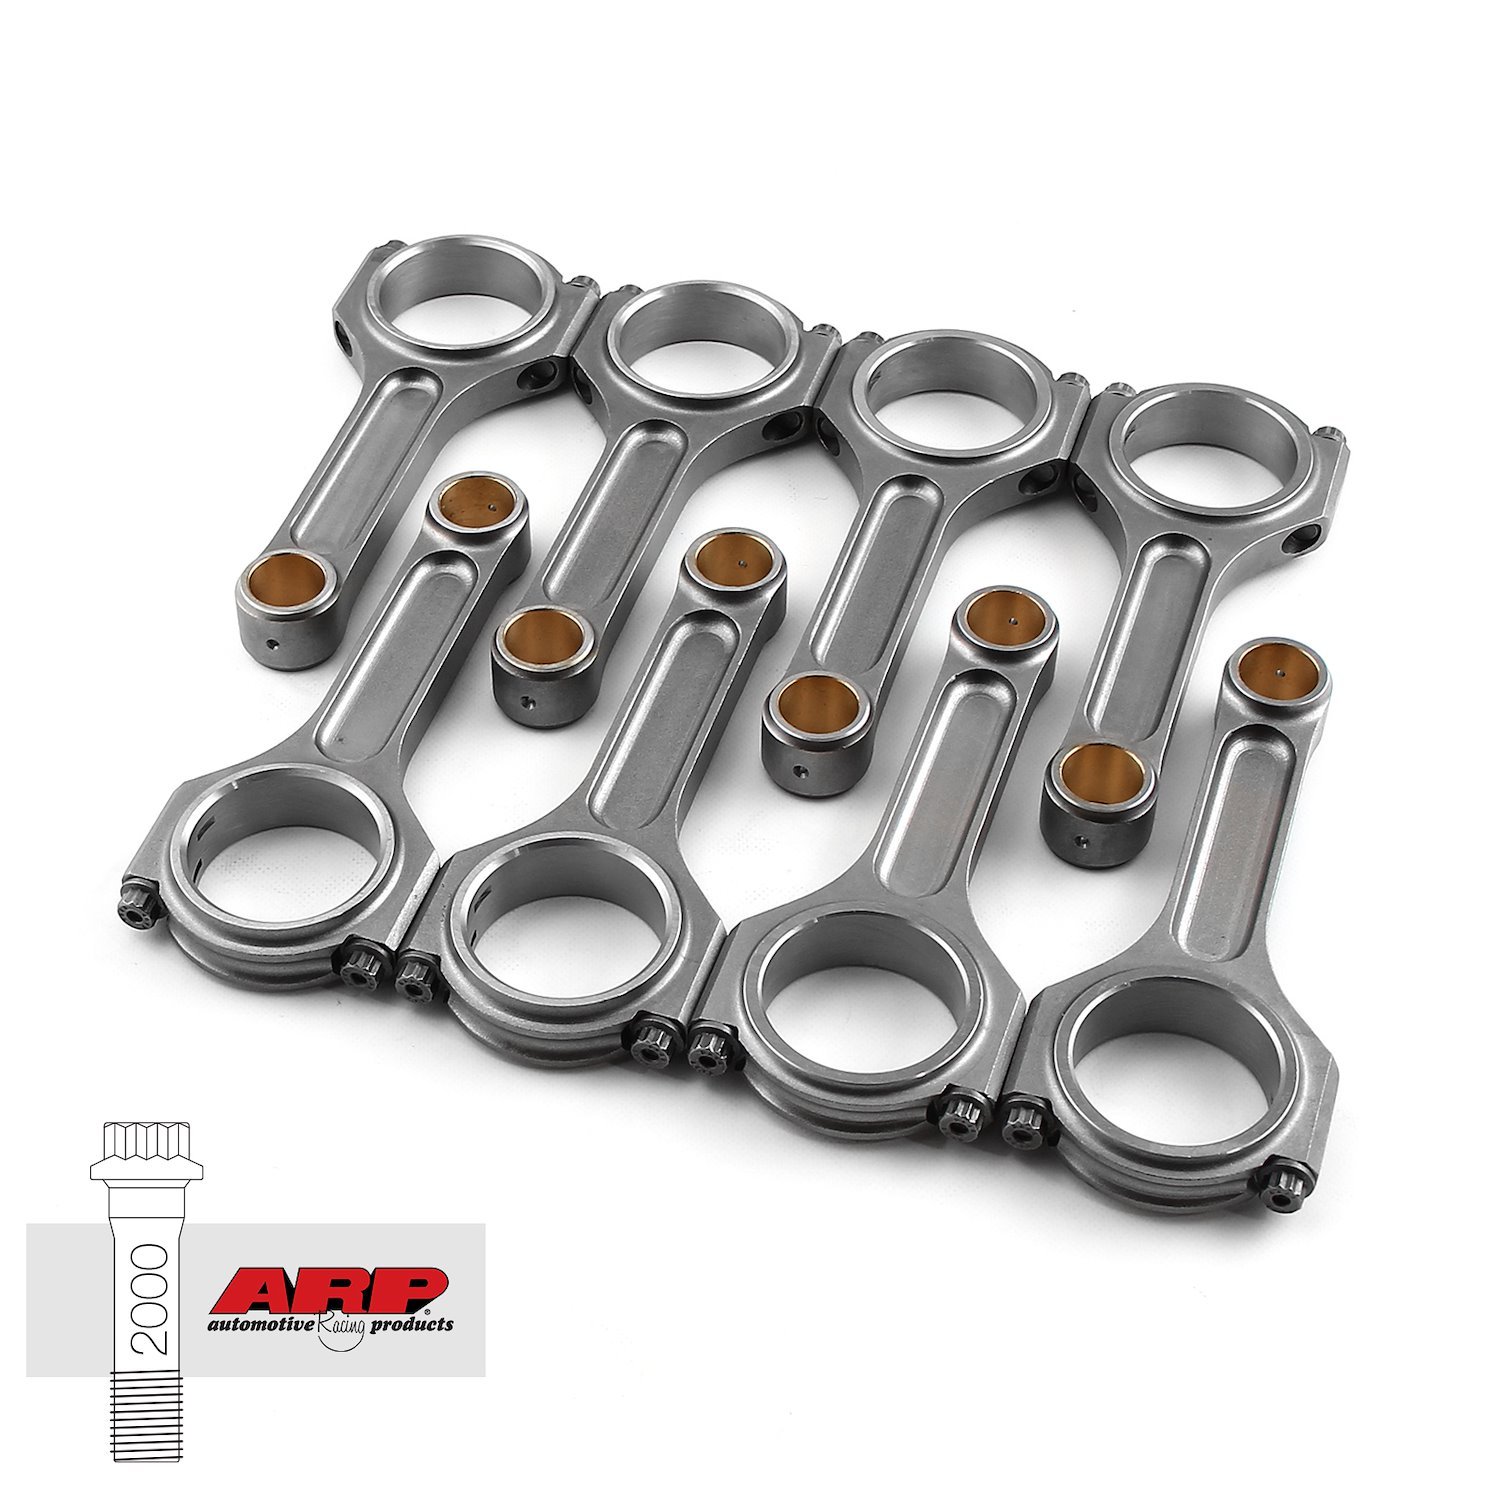 I BEAM PRO 5.956 2.310 .912 4340 CONNECTING RODS FORD 351 WINDSOR W/ ARP 2000